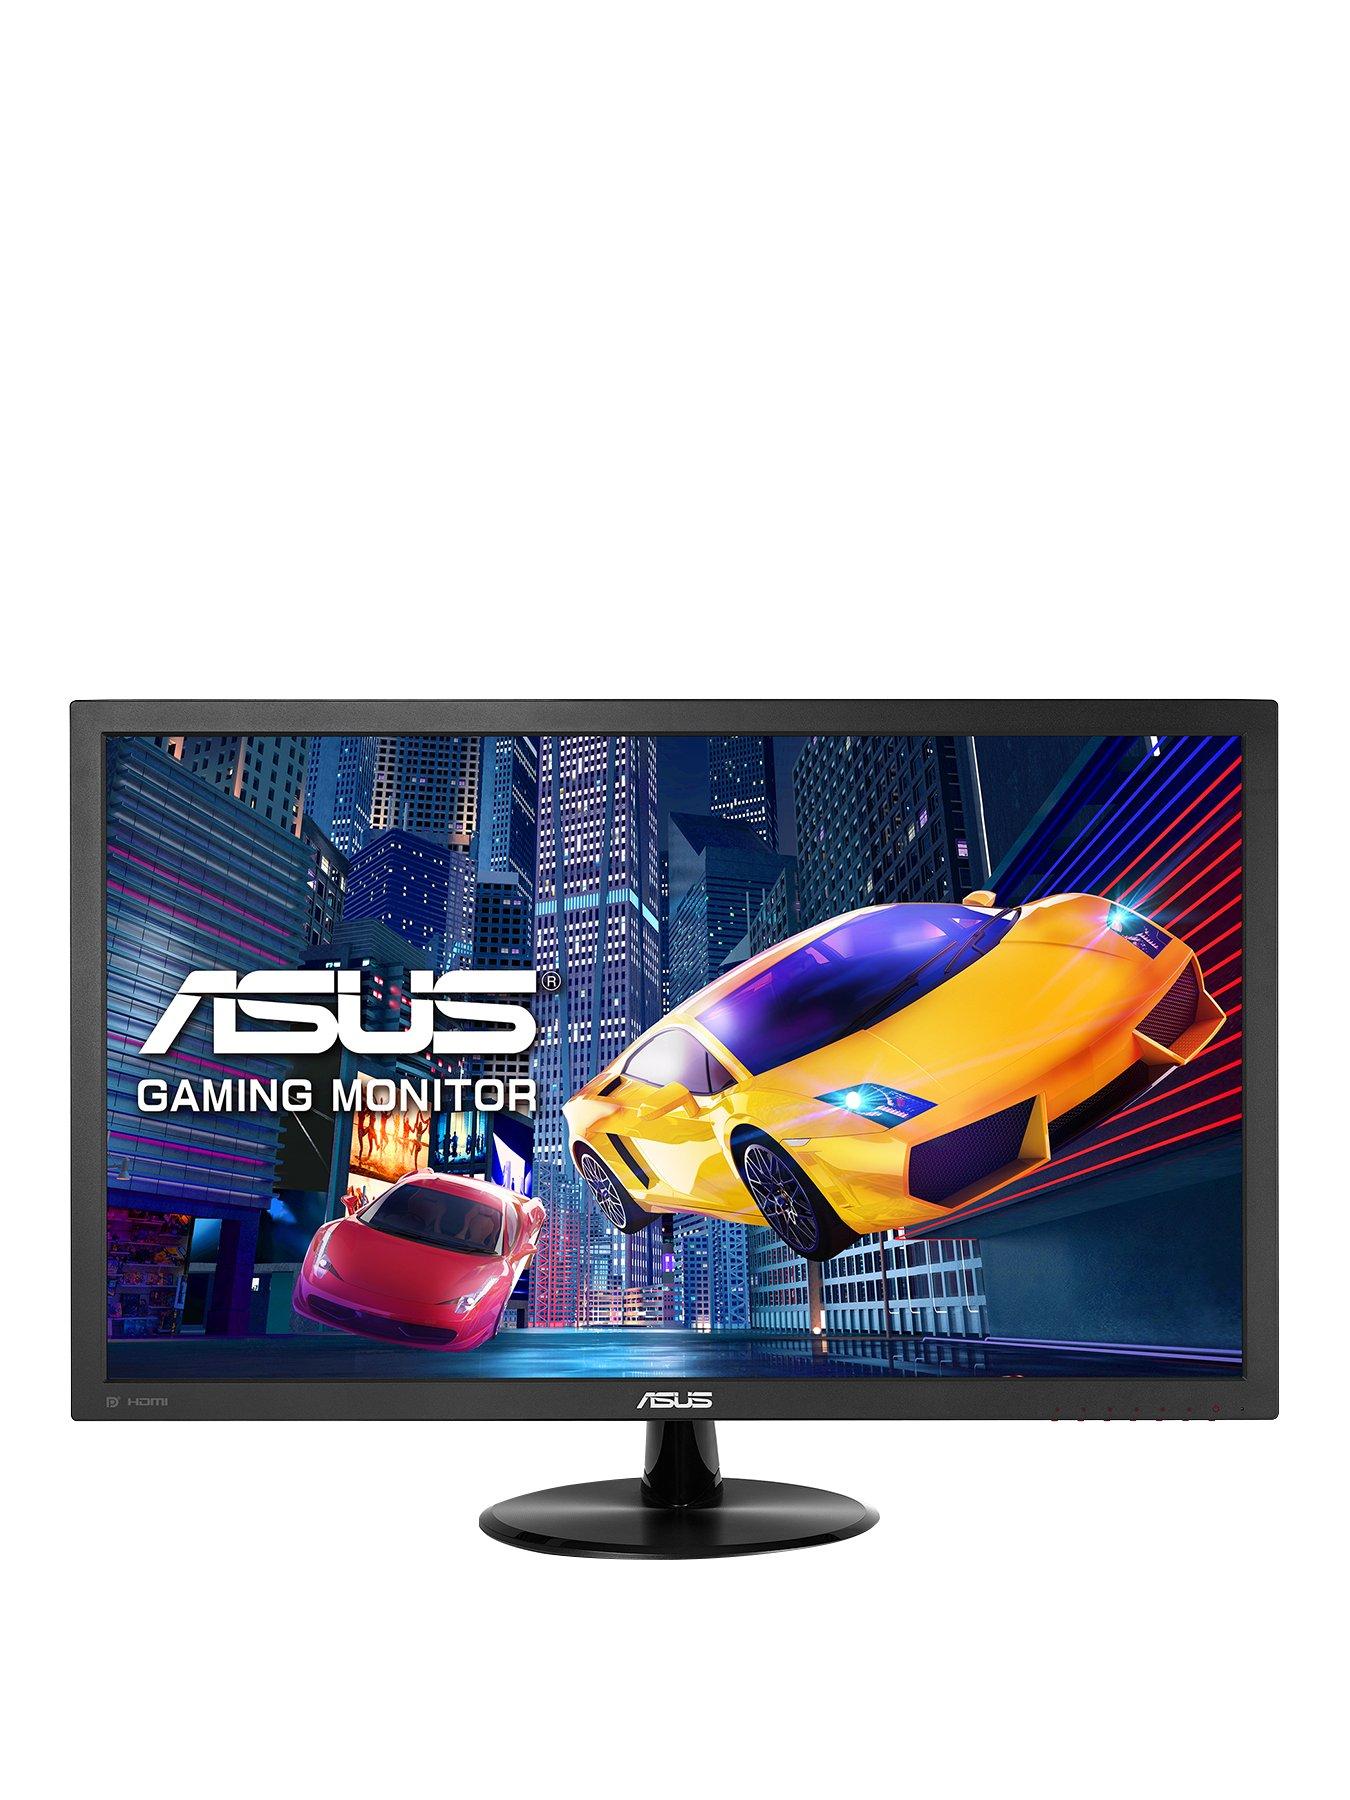 Latest Offers Gaming Monitors Gaming Laptops Pcs Gaming Dvd Www Very Co Uk